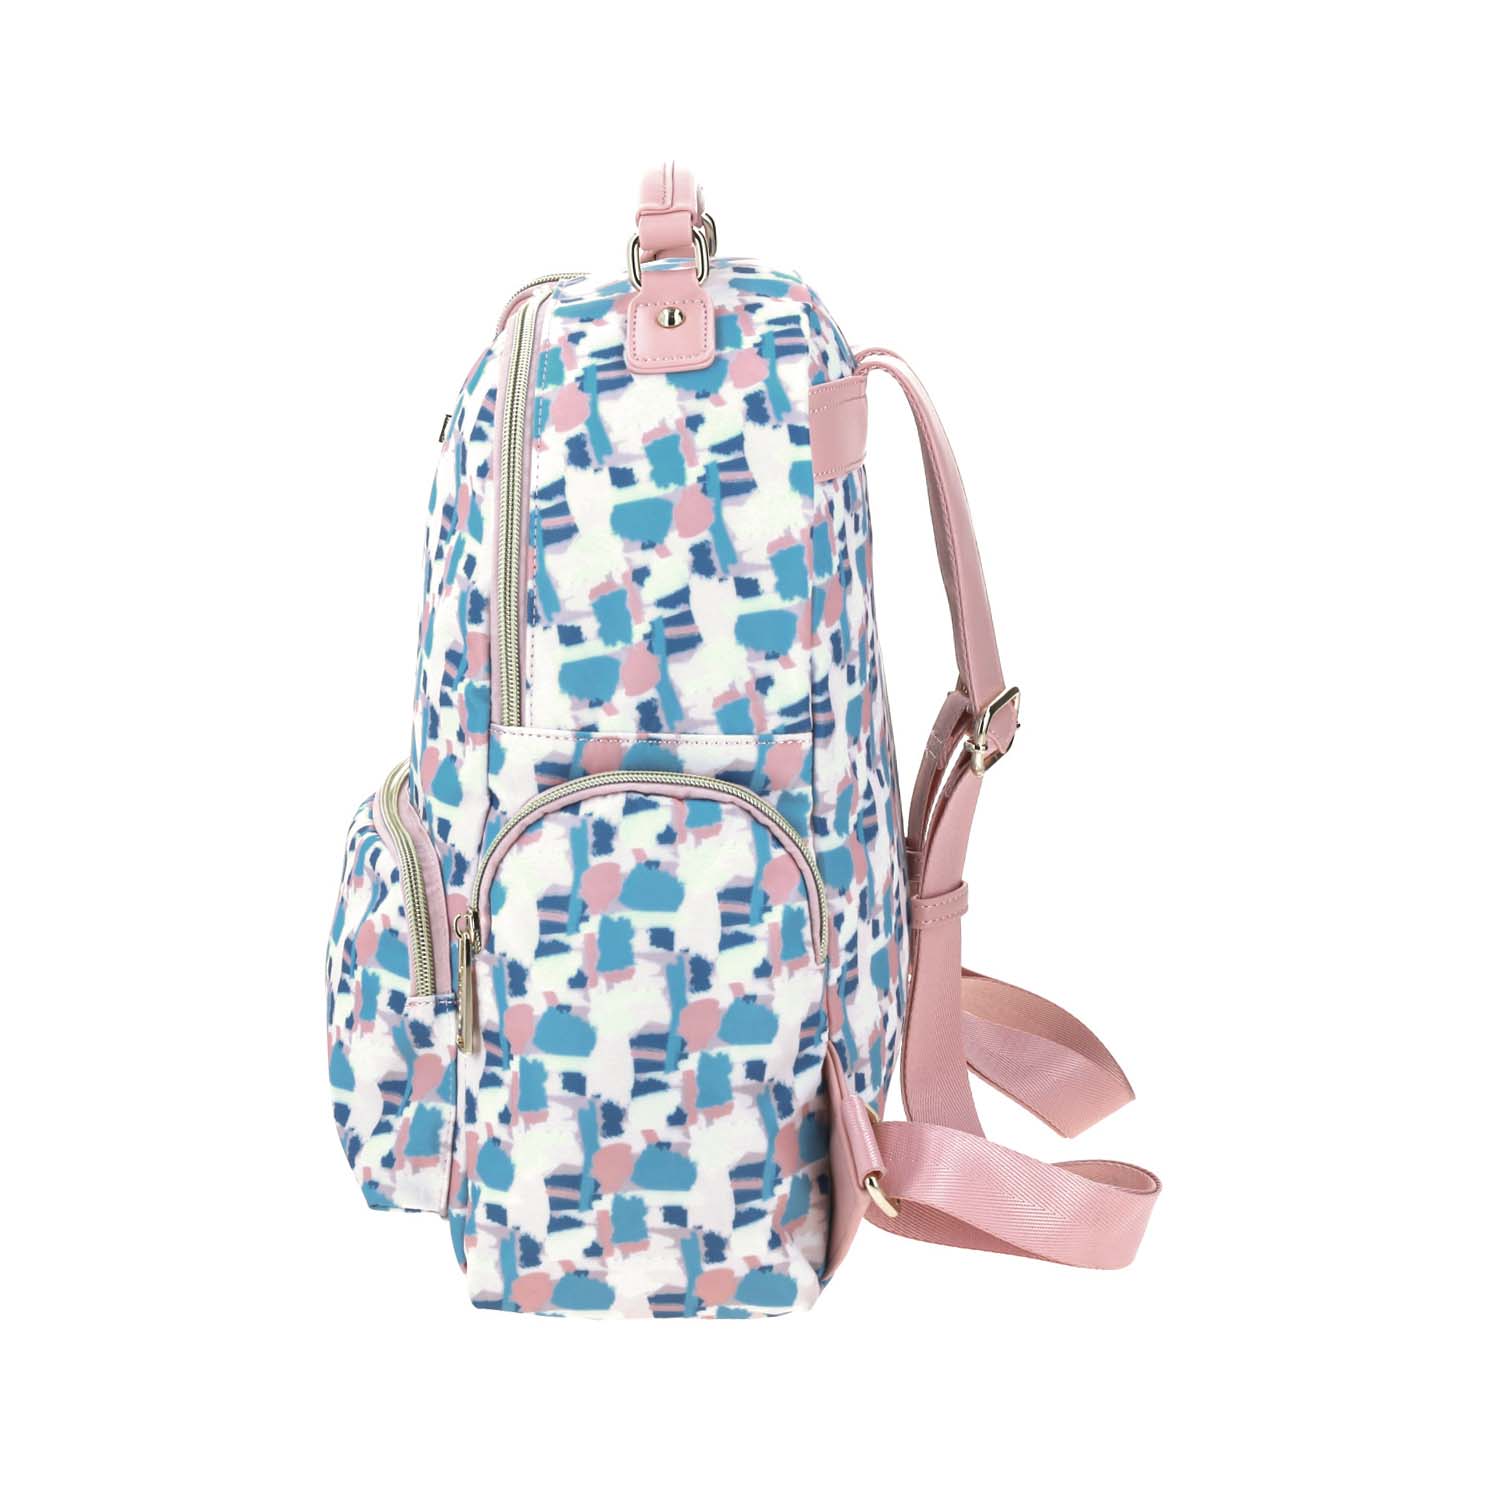 Backpack Print Rosa y Azul Sussan By Gorett